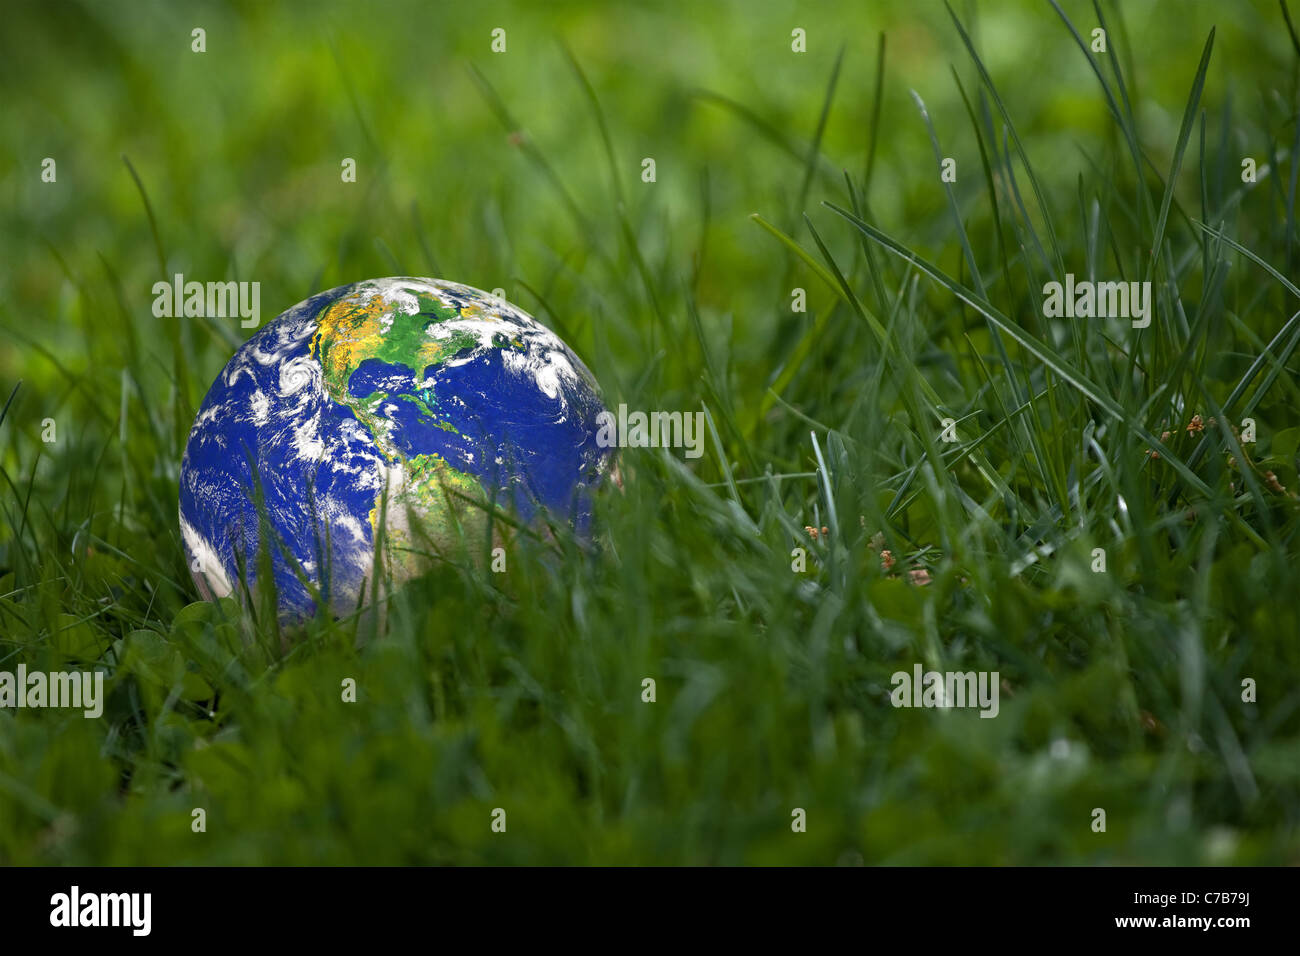 Conceptual image of the earth laying in the tall green grass. Shallow depth of field. Earth image courtesy of NASA. Stock Photo